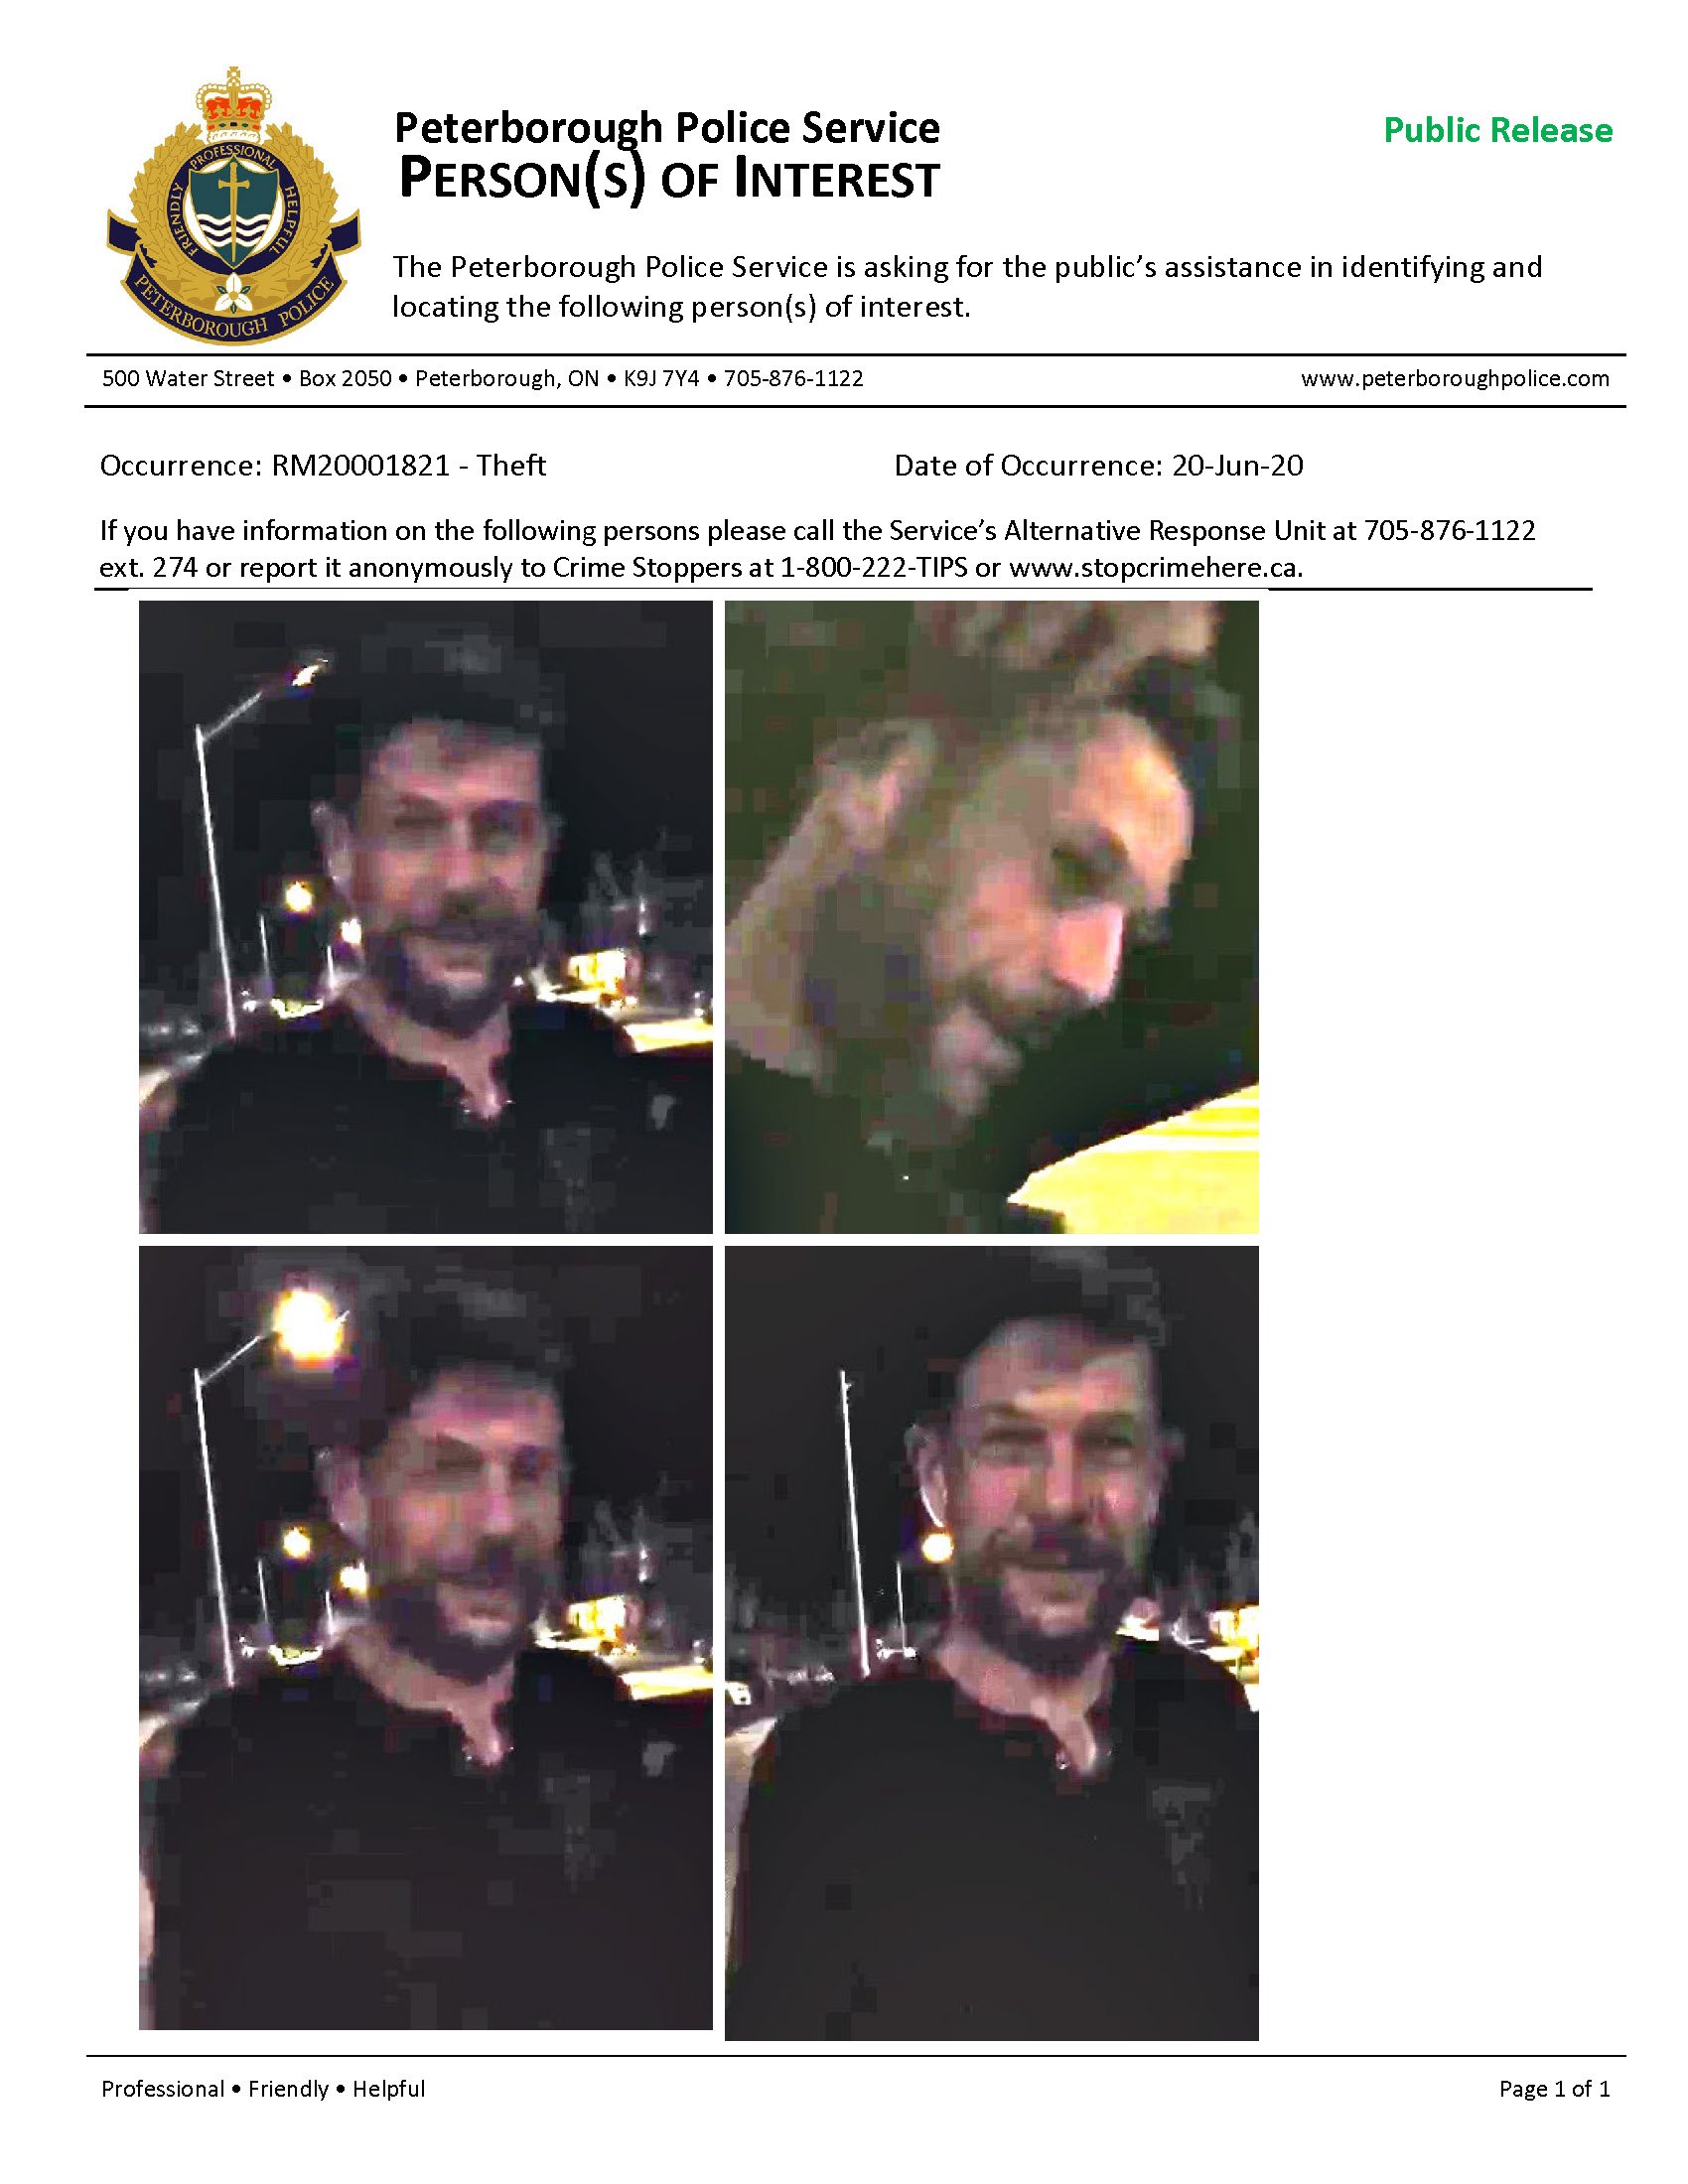 Person of interest with images of a man in a dark shirt and beard